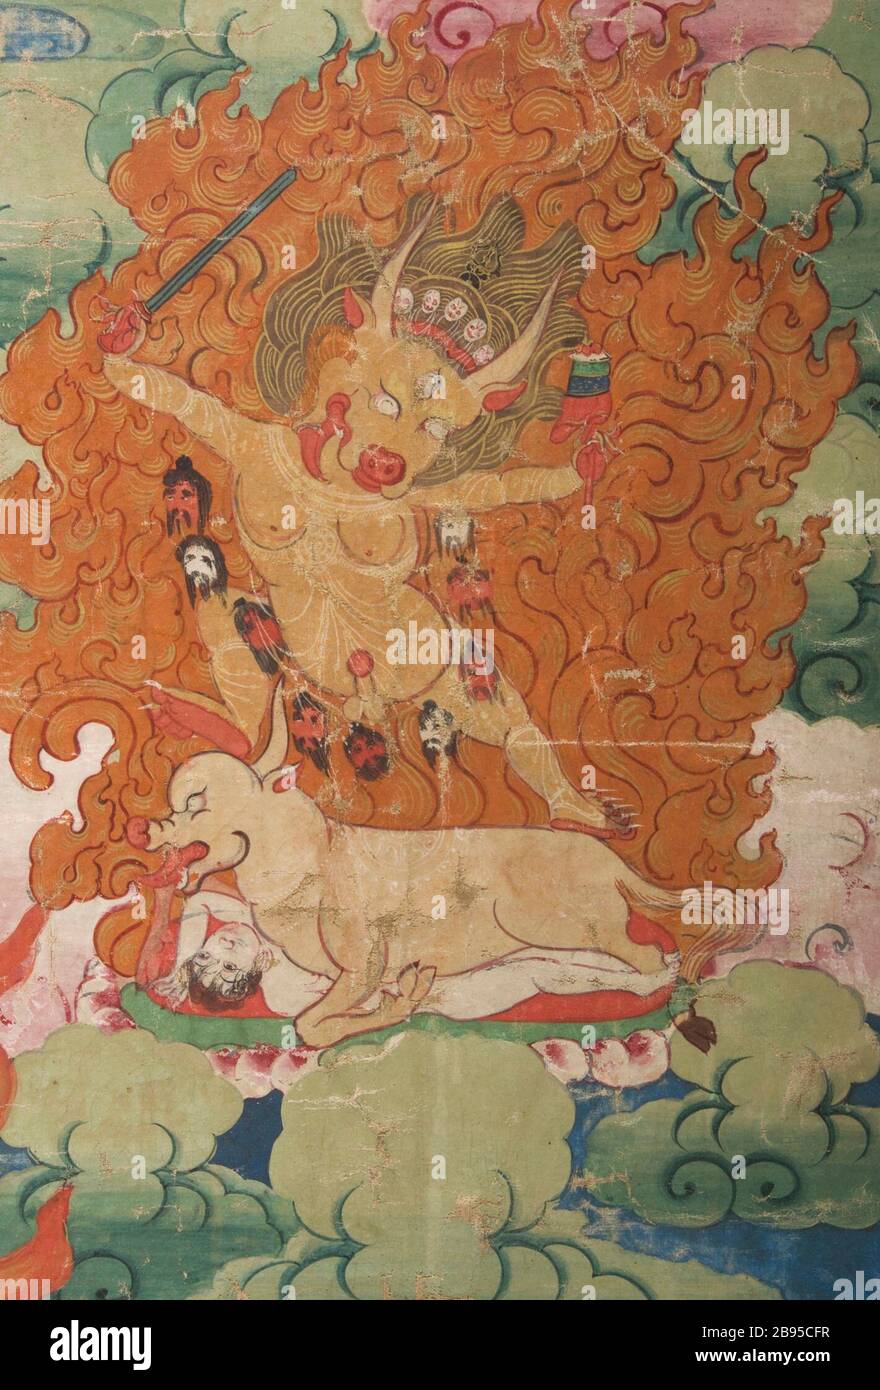 'Yama and Yami (image 9 of 21); English:  Eastern Tibet, Kham region, circa 1675-1725 Paintings Mineral pigments and gold on cotton cloth Image: 94 1/2 x 58 1/4 in. (240.03 x 147.96 cm); Overall (with former mount): 317.5 x 212.09 cm. (125 x 83 1/2 in) Gift of Mr. and Mrs. Jack Zimmerman (M.71.78) South and Southeast Asian Art; between circa 1675 and circa 1725 date QS:P571,+1500-00-00T00:00:00Z/6,P1319,+1675-00-00T00:00:00Z/9,P1326,+1725-00-00T00:00:00Z/9,P1480,Q5727902; ' Stock Photo